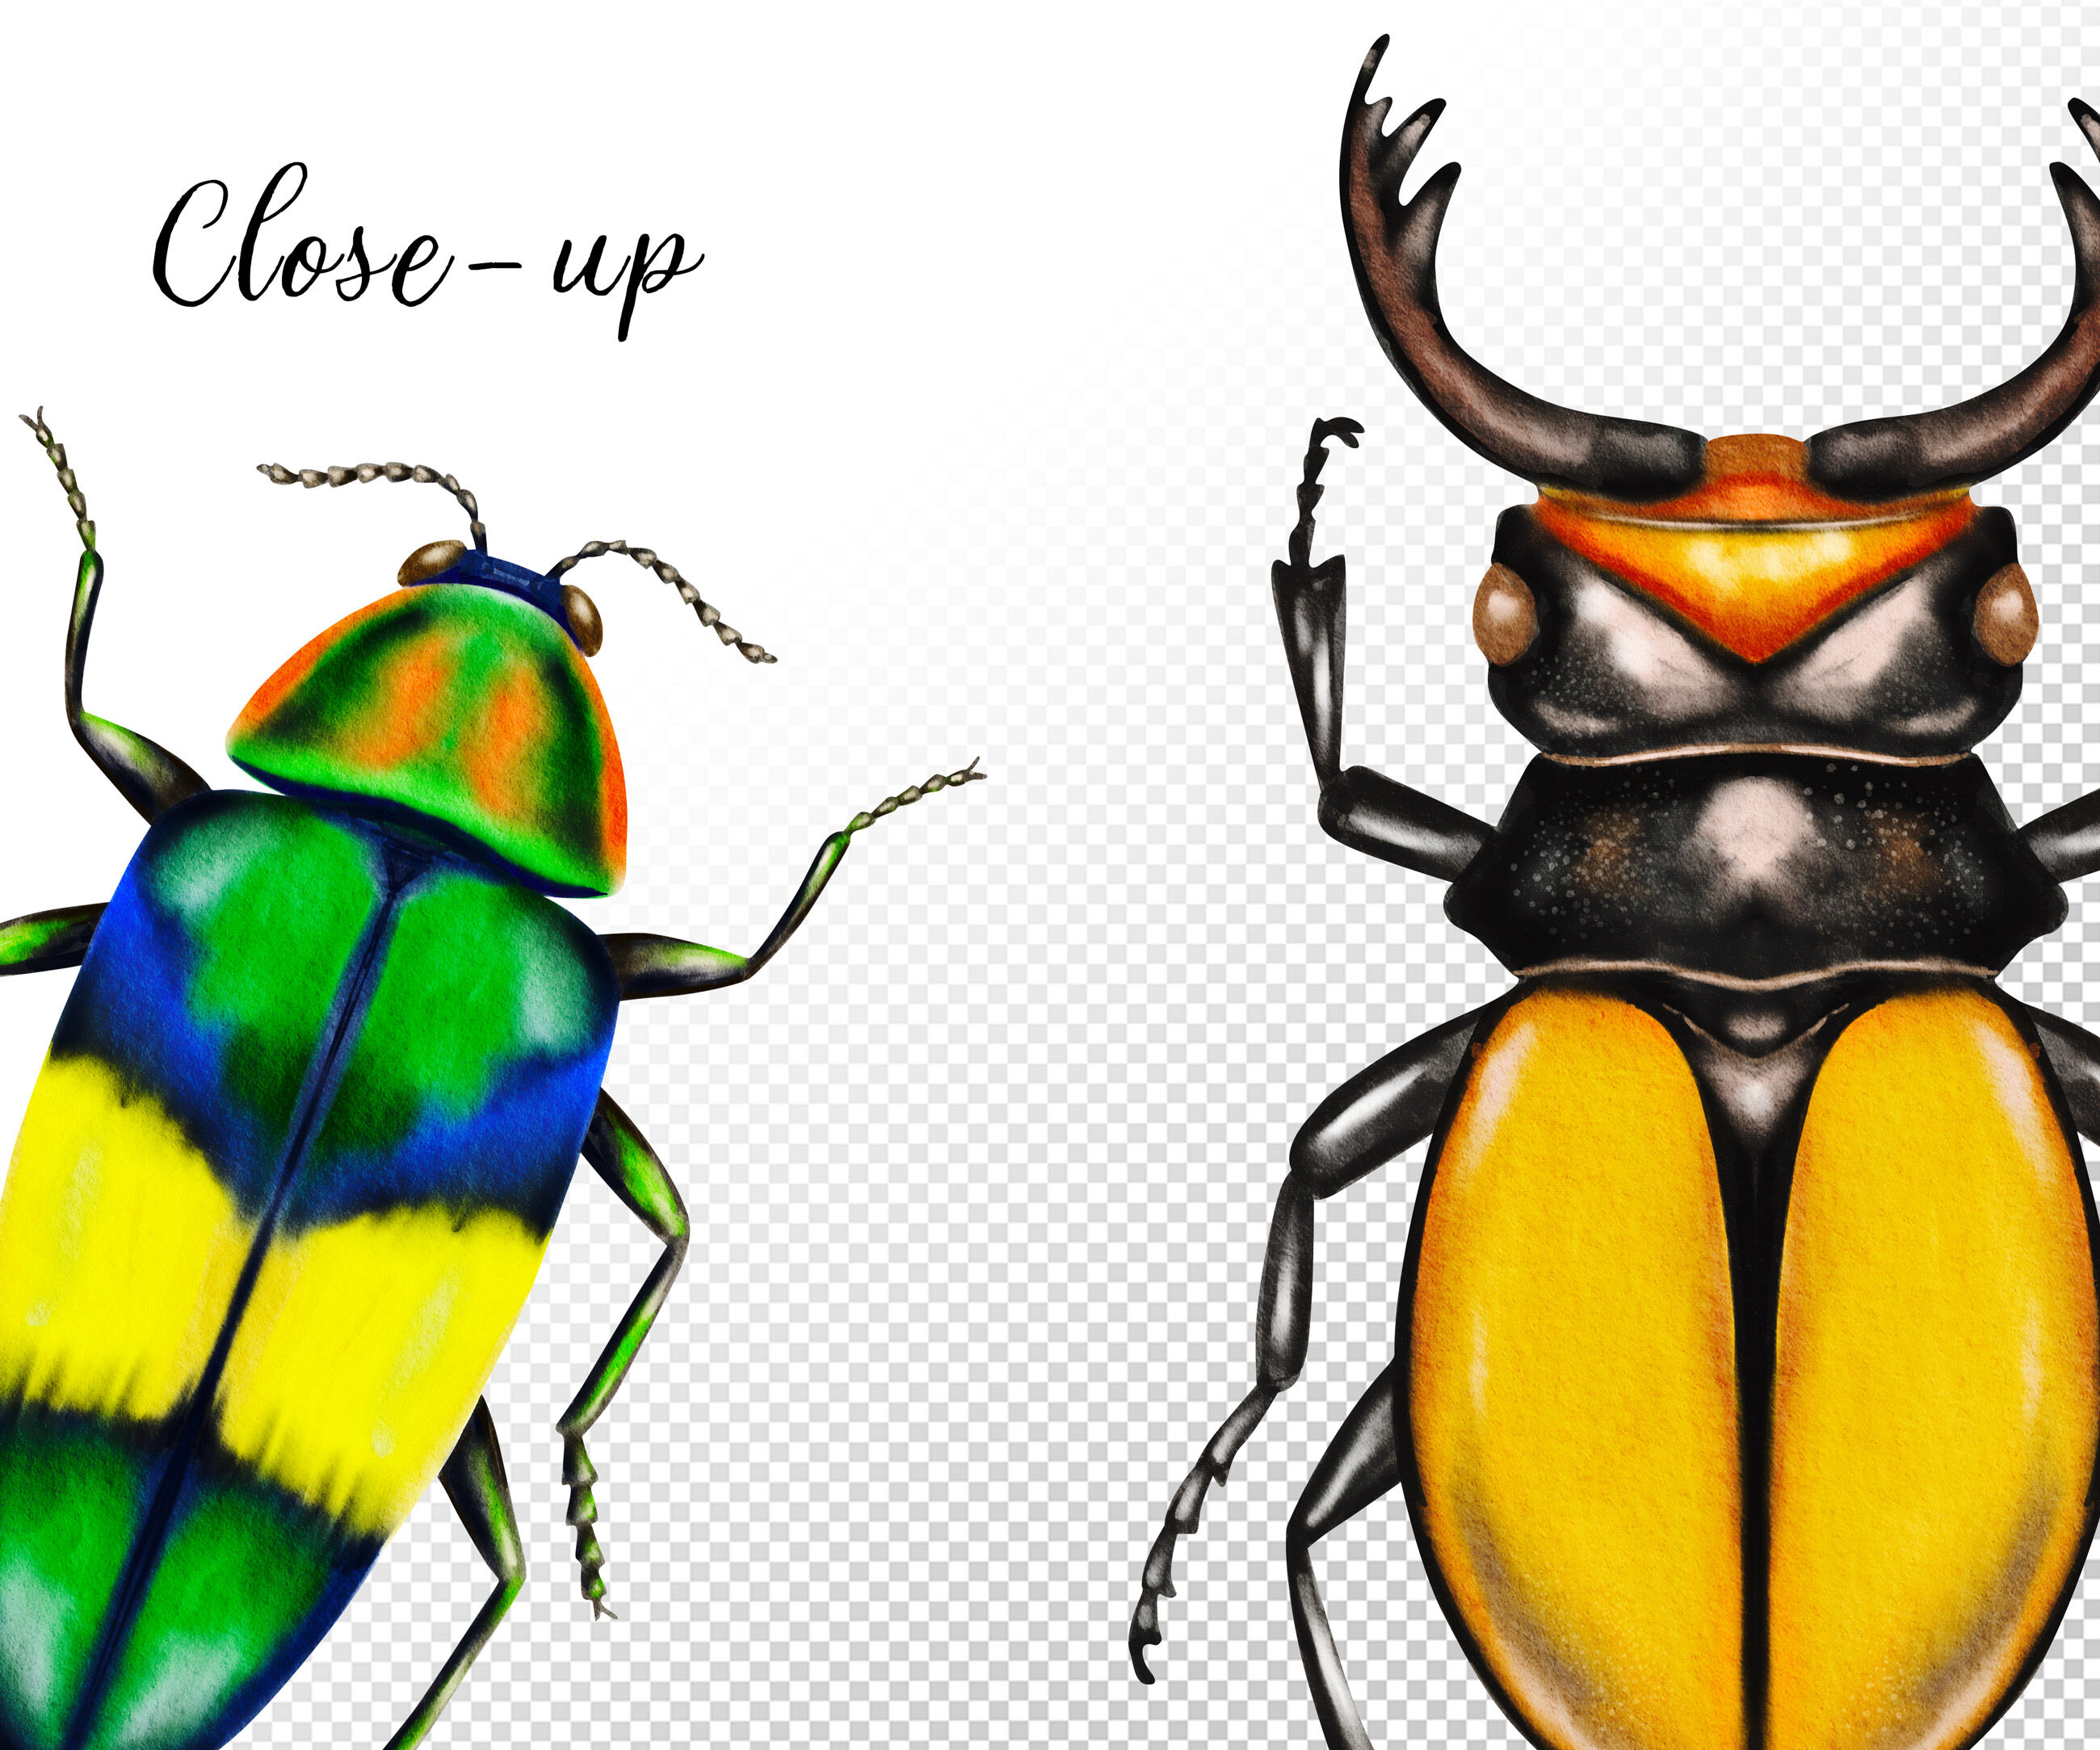 Watercolor Beetles Clipart, Bug, Insects, Bug Catching, Beetles